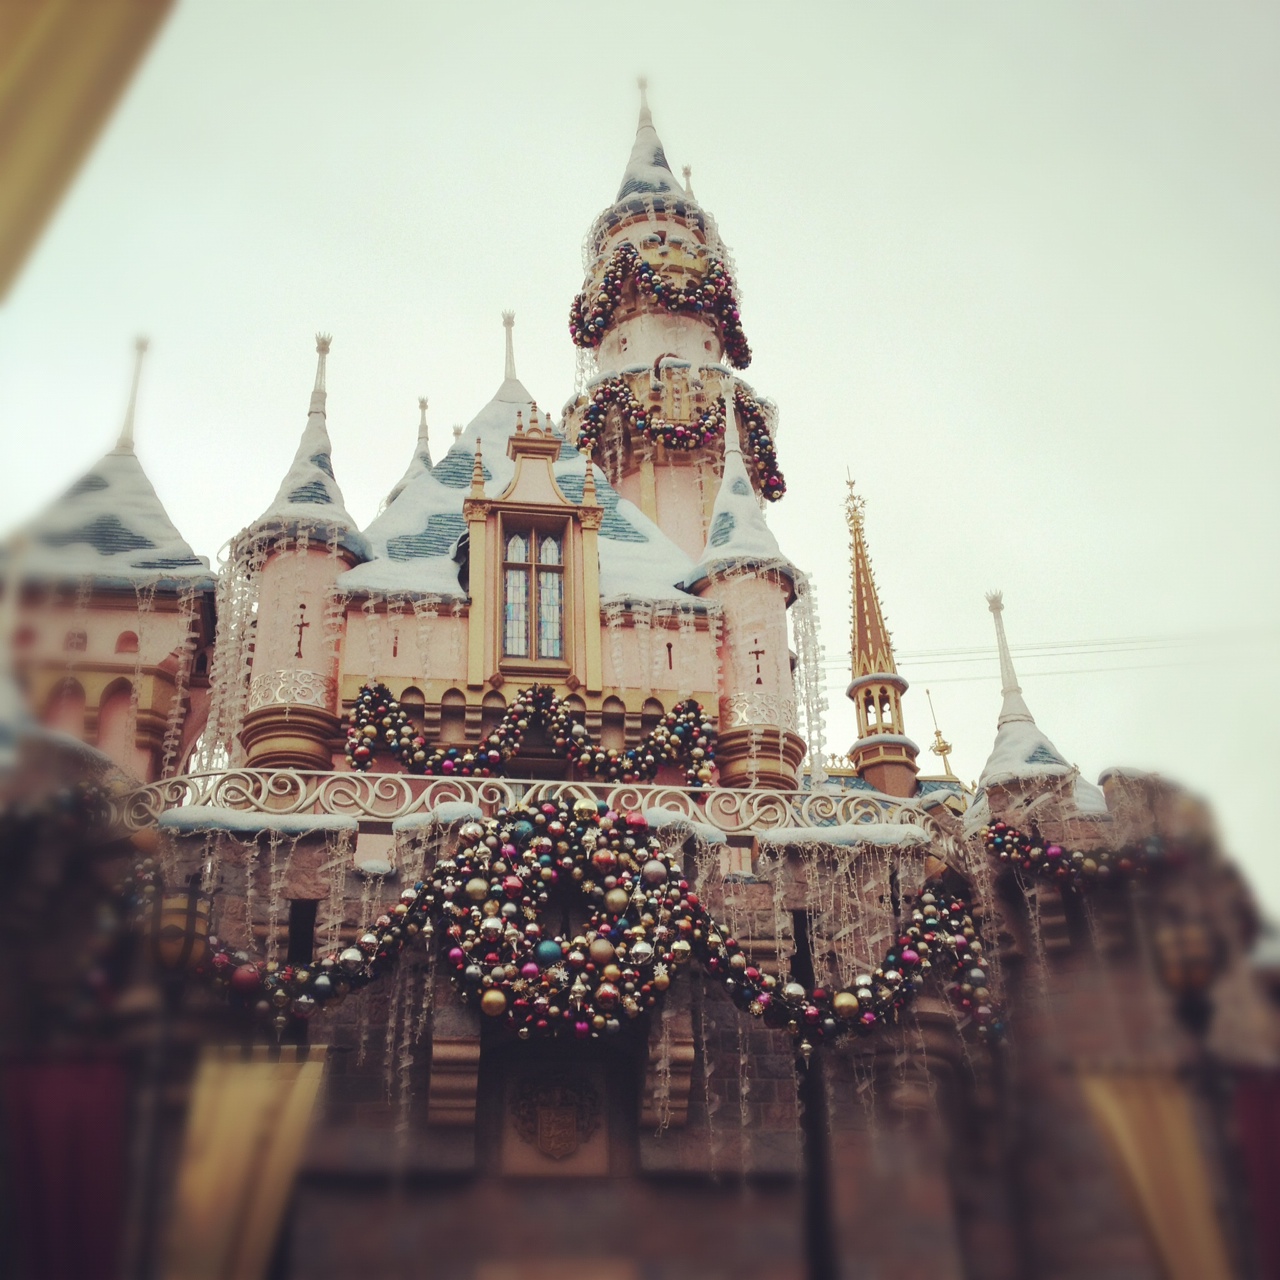 A pink castle with Christmas decorations at Disneyland. - Disneyland